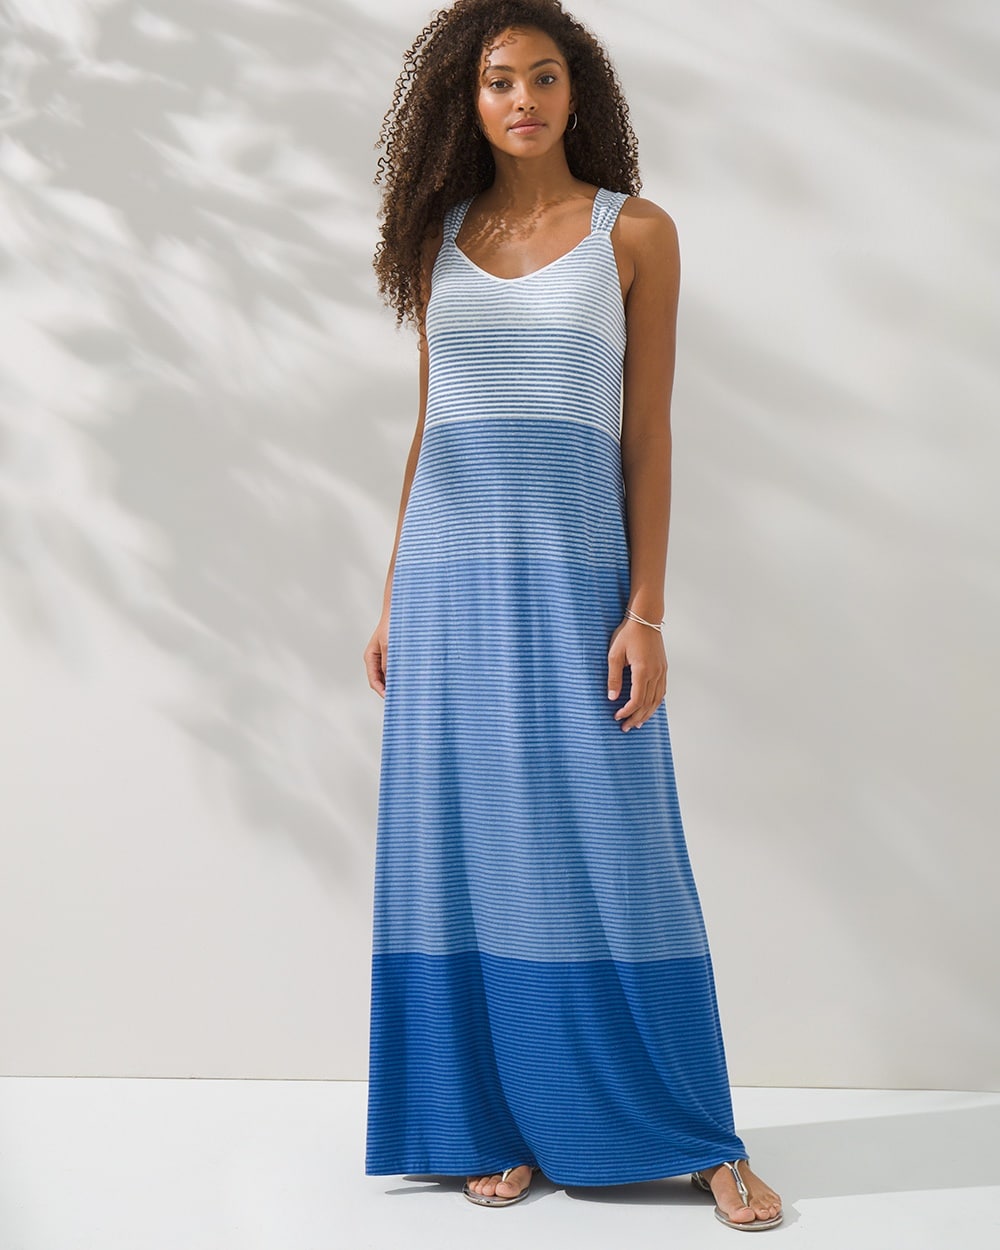 Ombre Stripe Soft Jersey V-Neck Maxi Dress with Built-In Bra